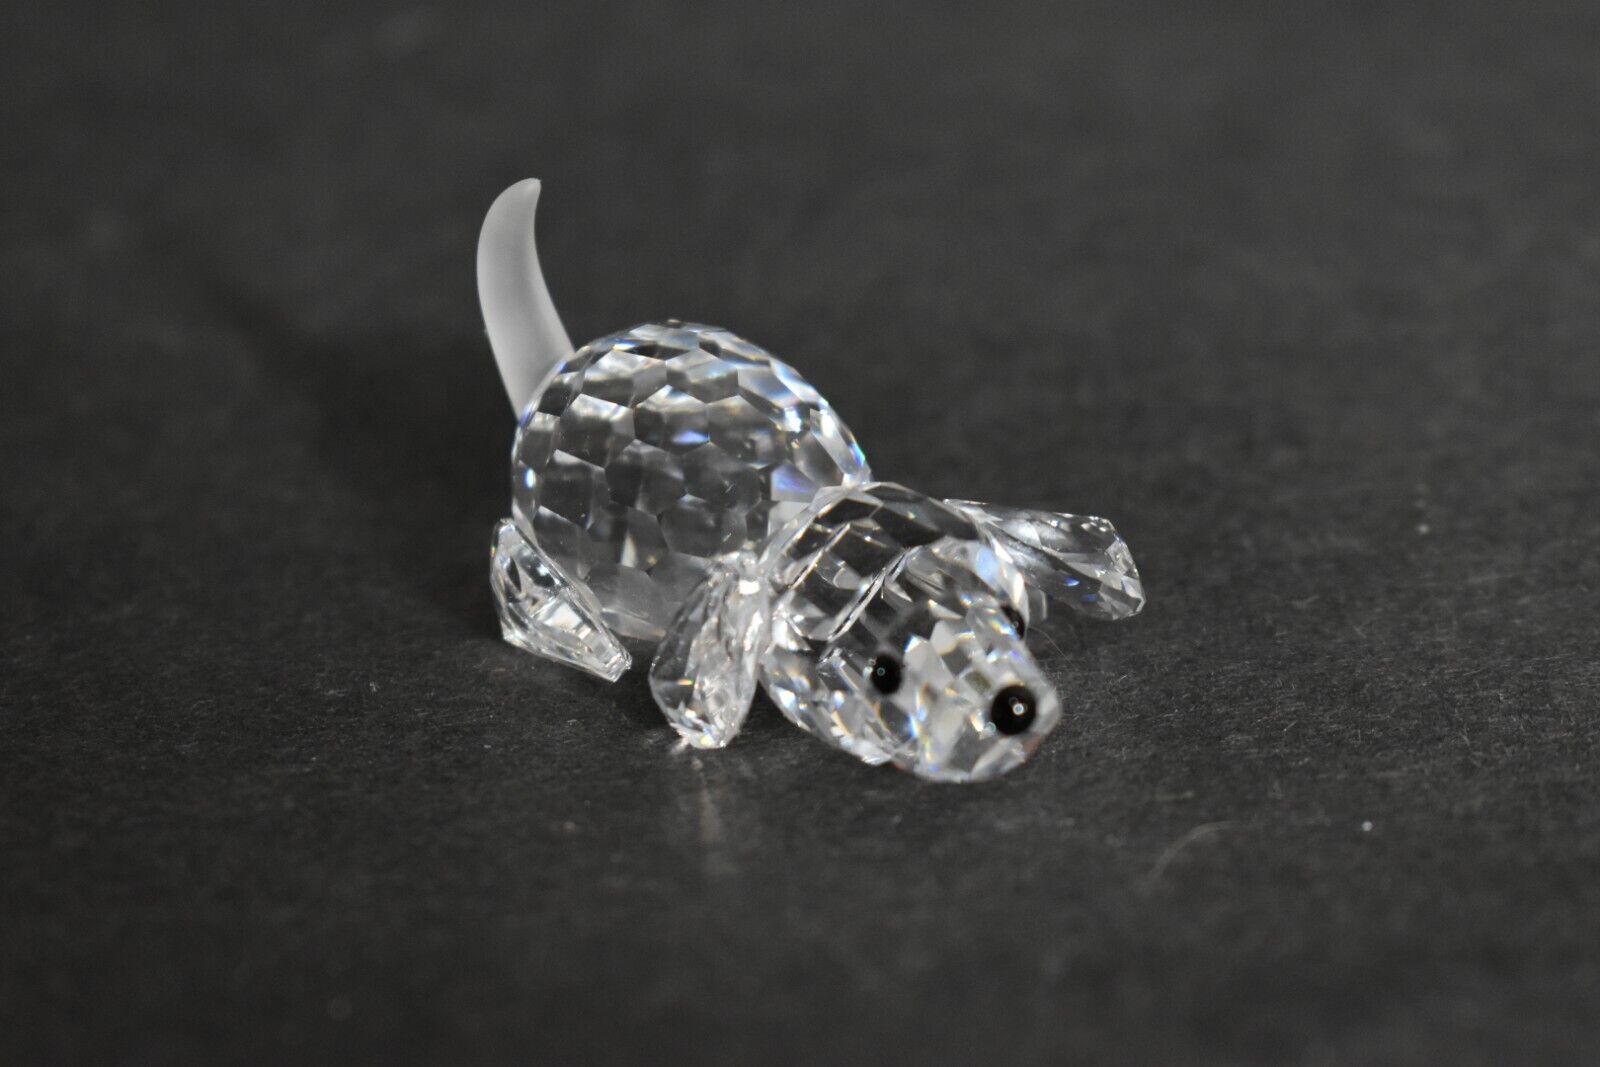 Swarovski Crystal Playing Beagle Puppy Dog Figurine with a Frosted Tail. No Box